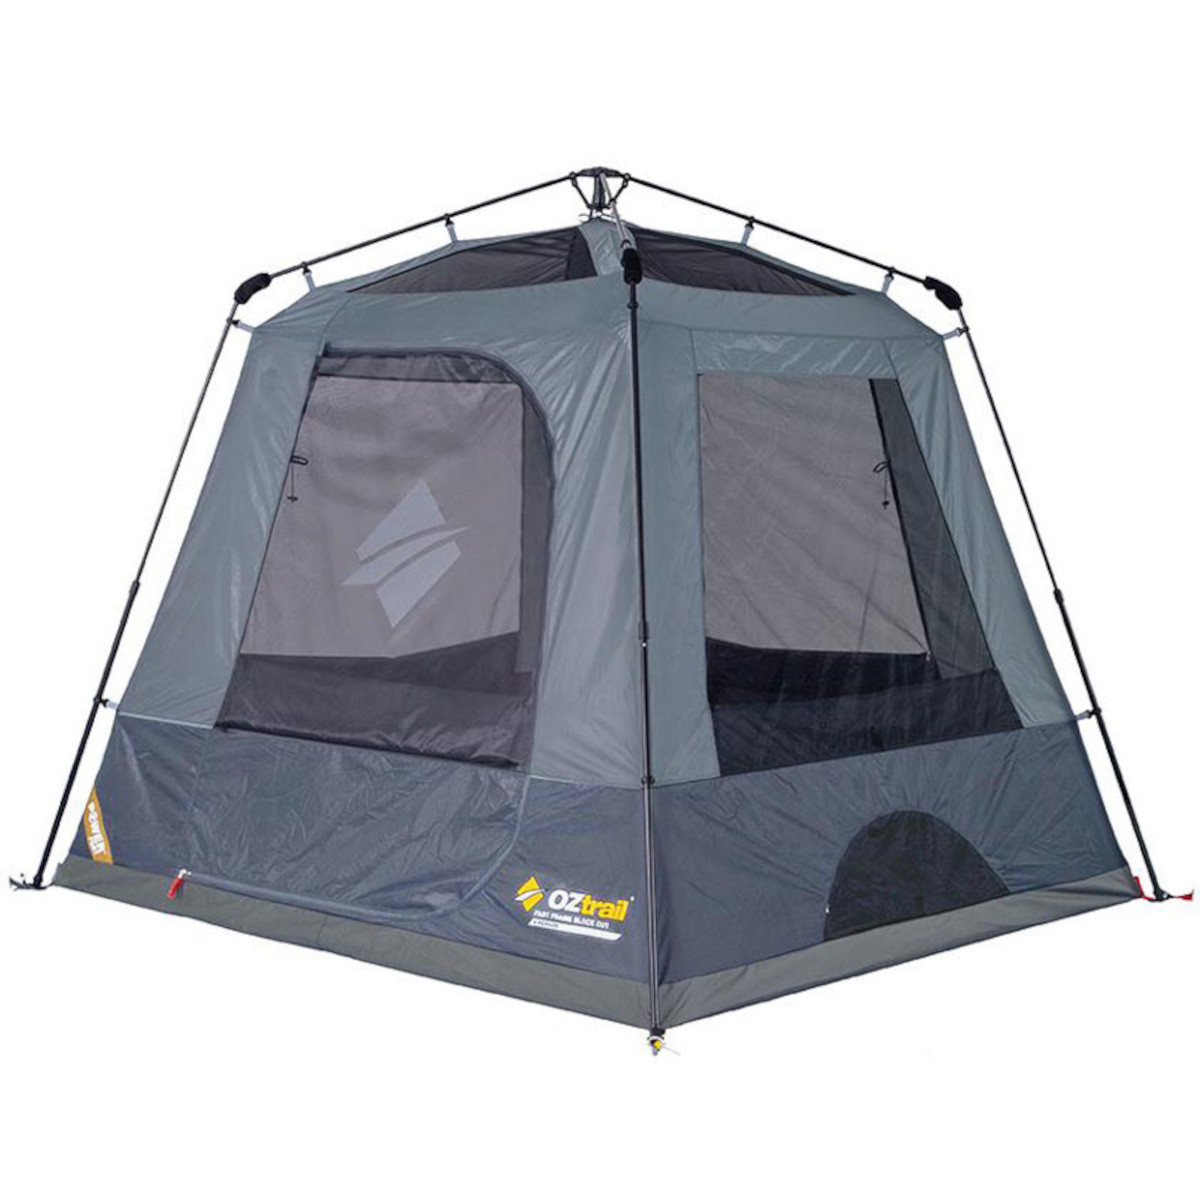 Oztrail Fast Frame 4P-camp tent